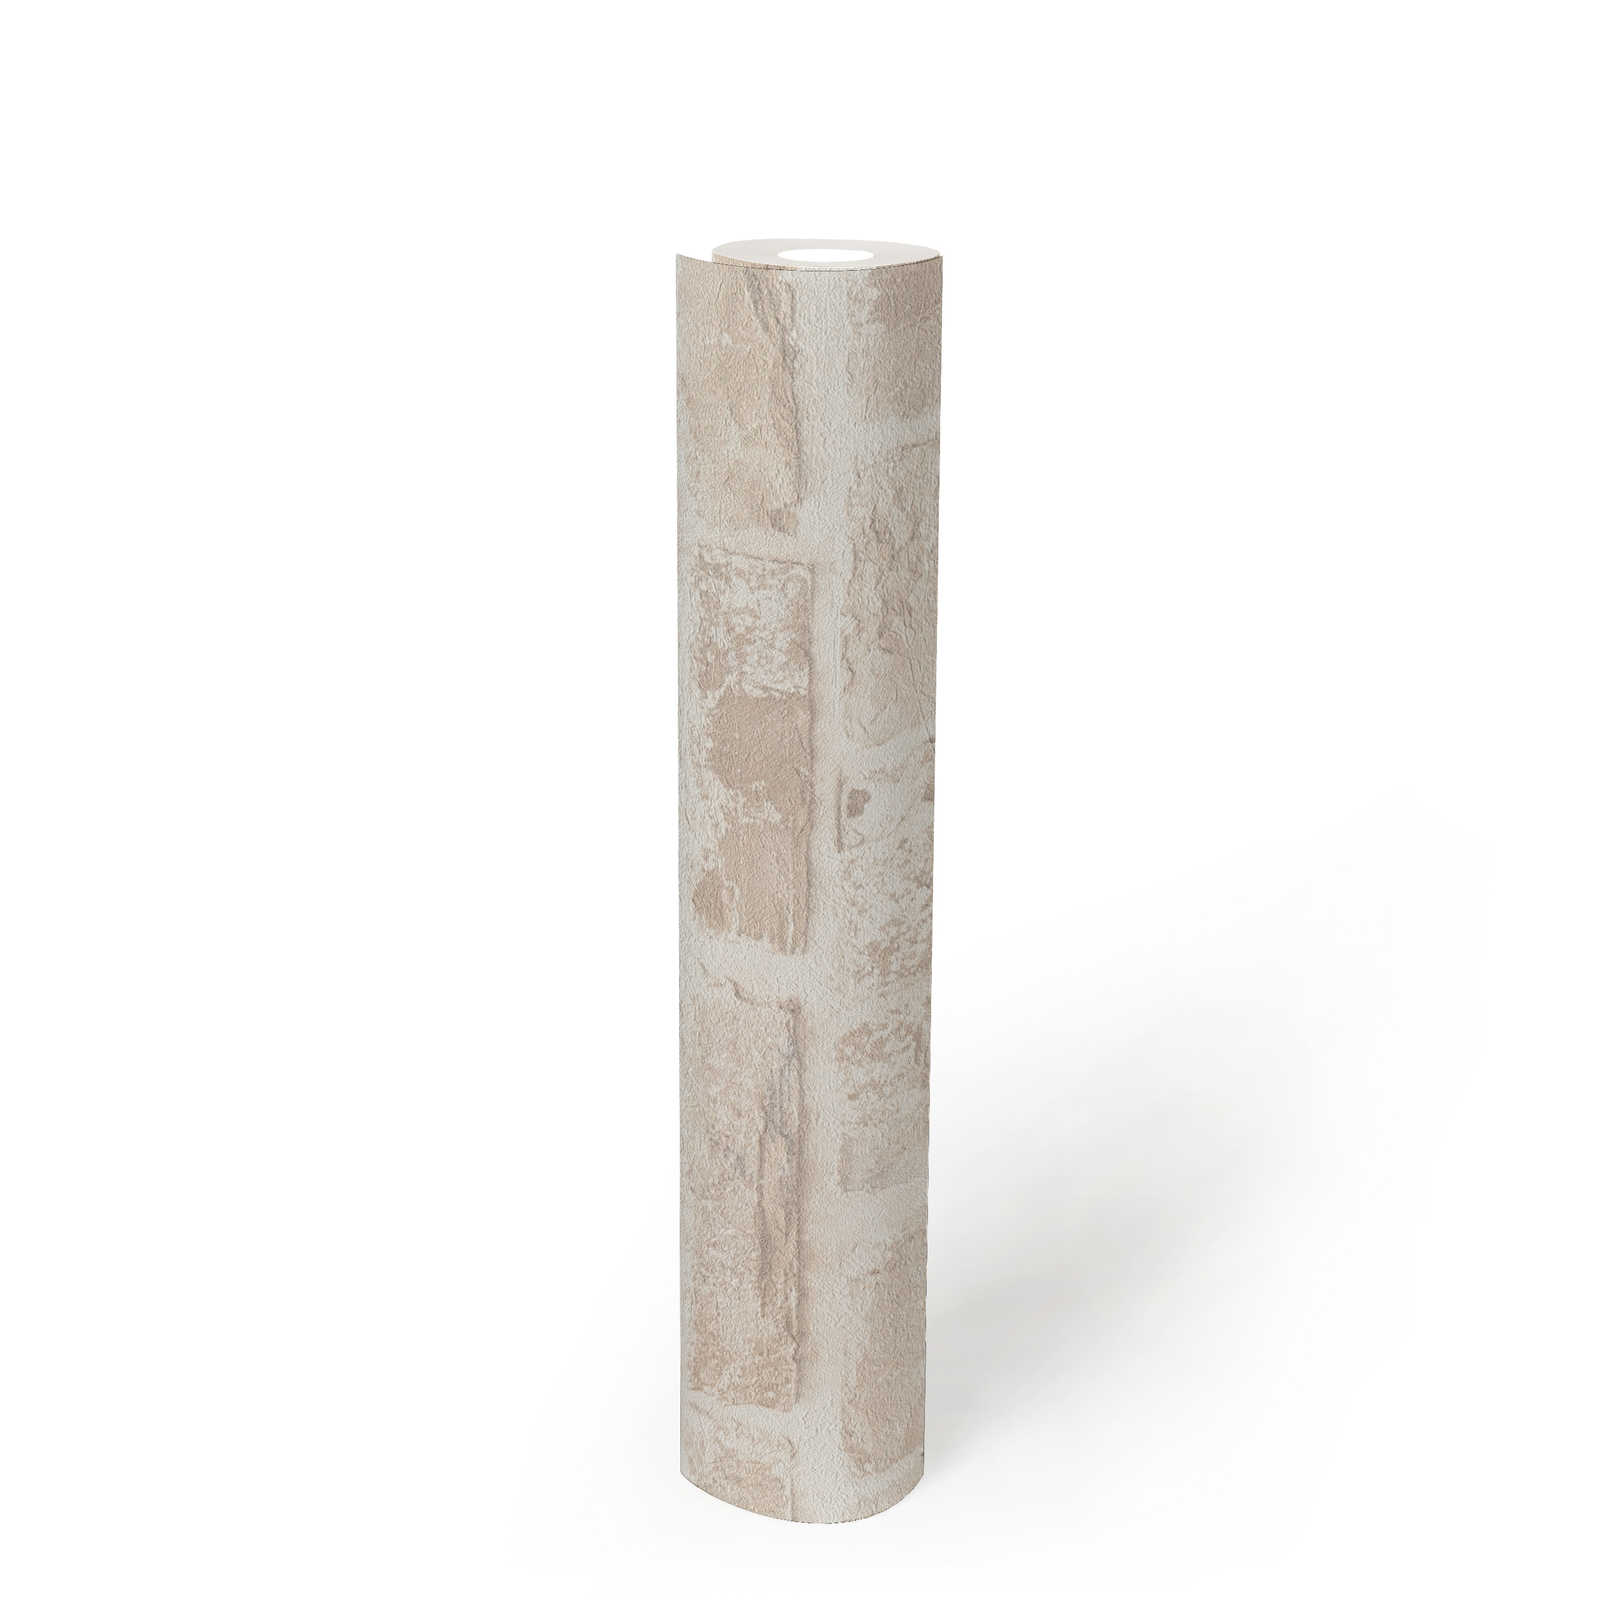             Non-woven wallpaper with stone look PVC-free - beige, white
        